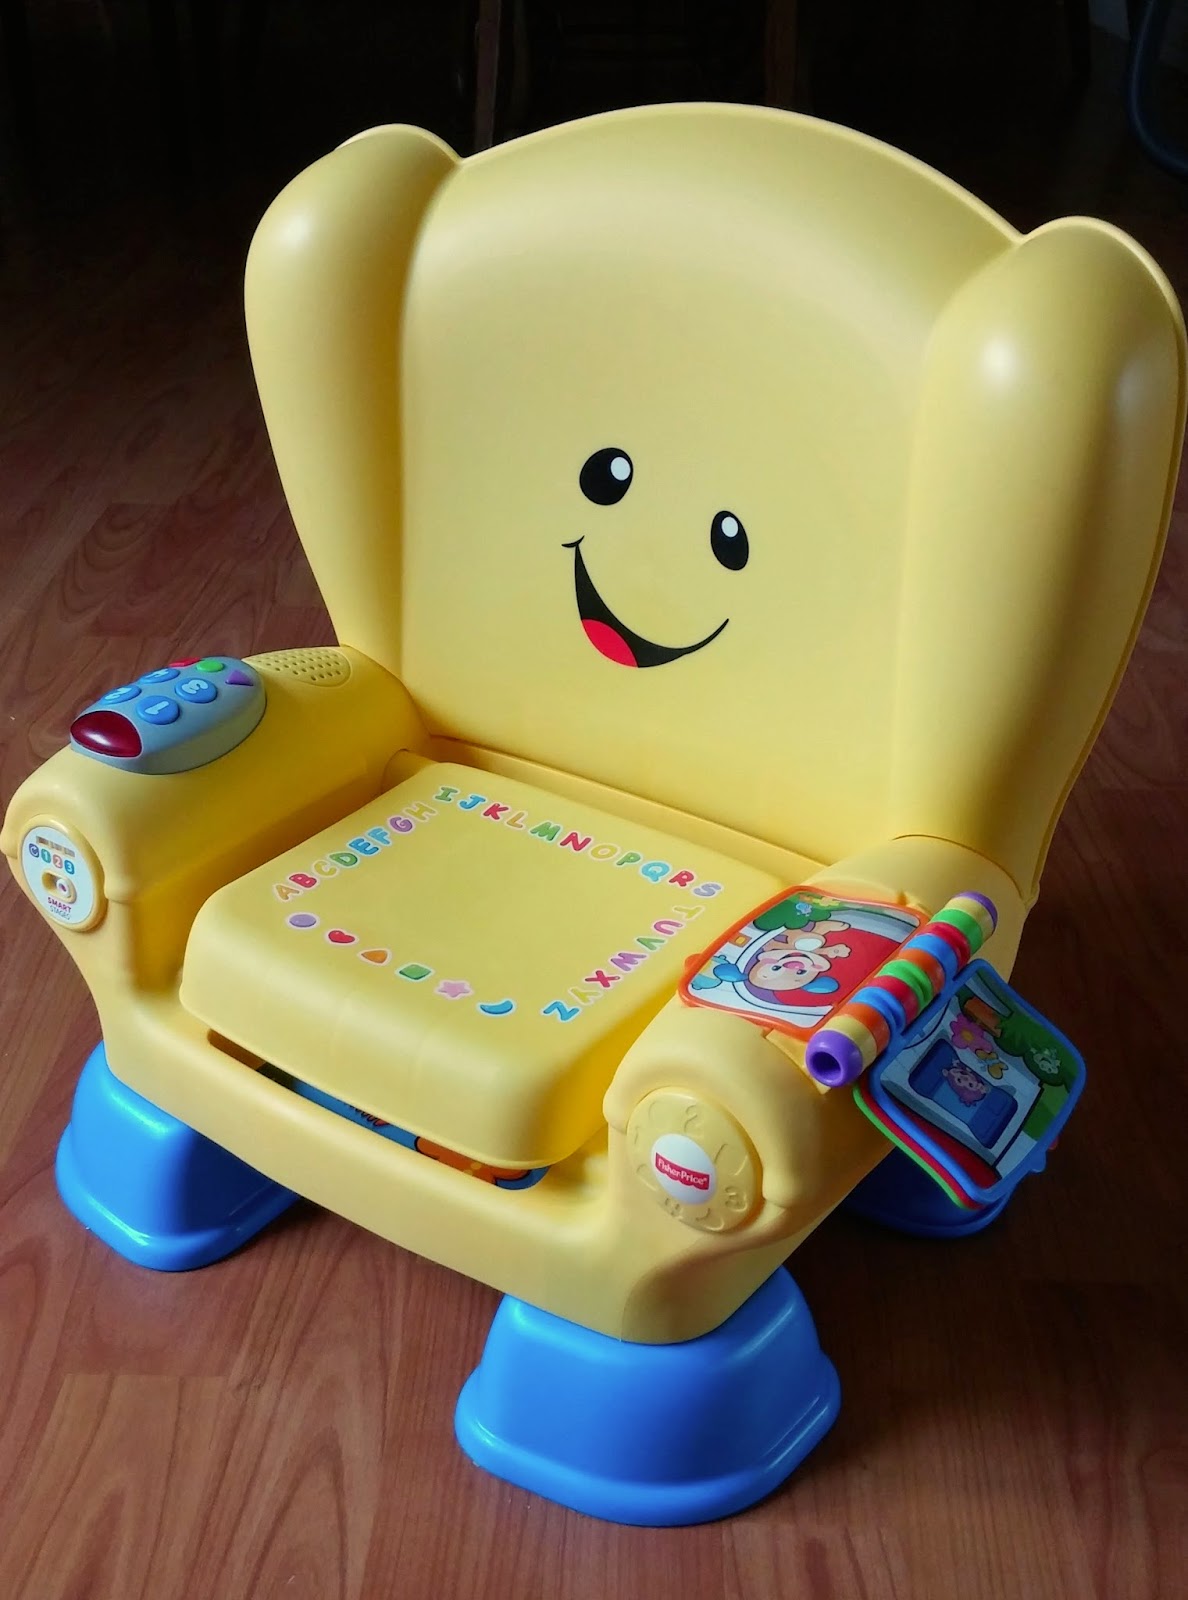 Introducing The New Fisher Price Laugh Learn Smart Stages Chair Toronto Teacher Mom